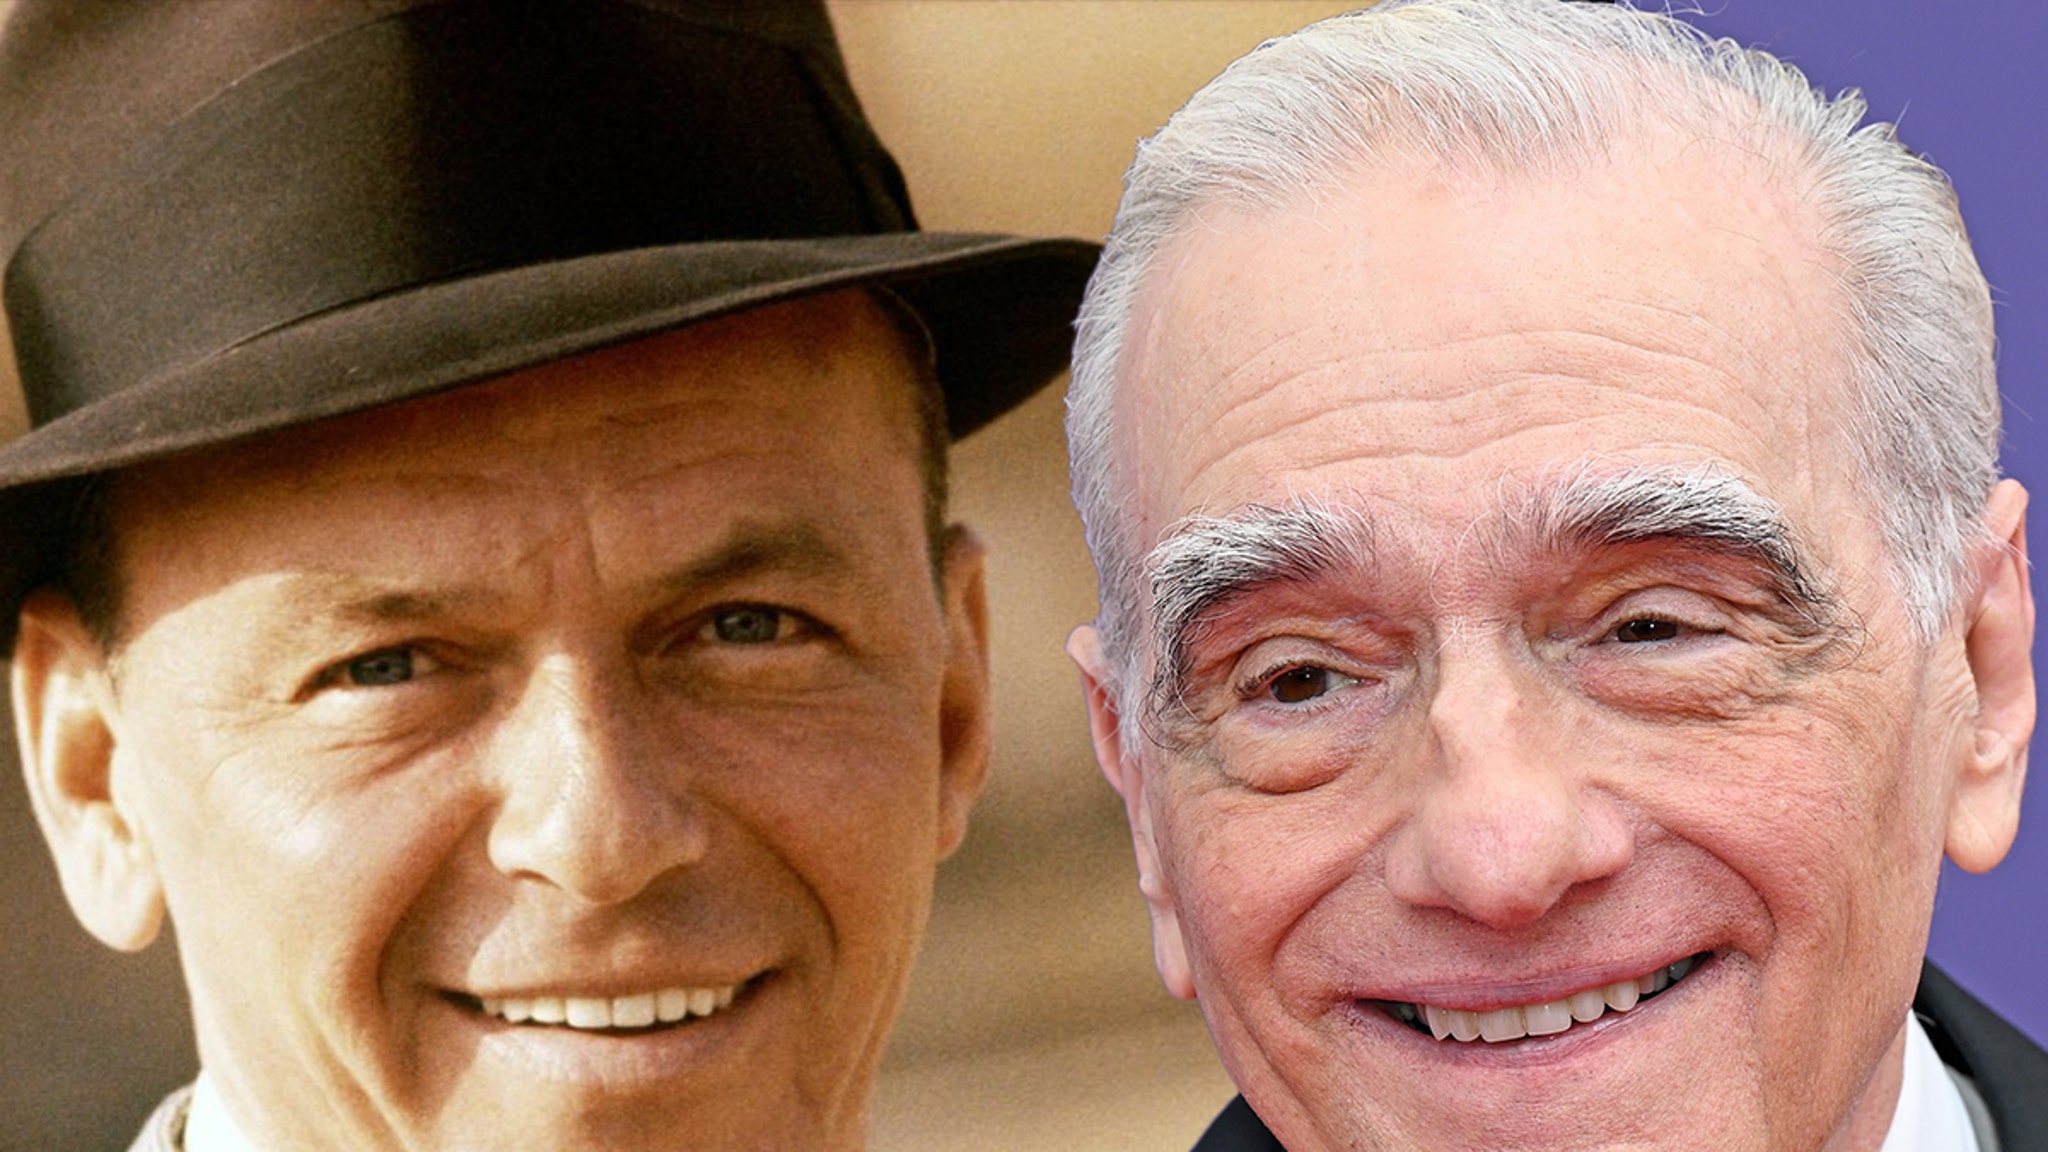 Frank Sinatra's Daughter Reacts to Scorsese Biopic, Seems A-OK With It